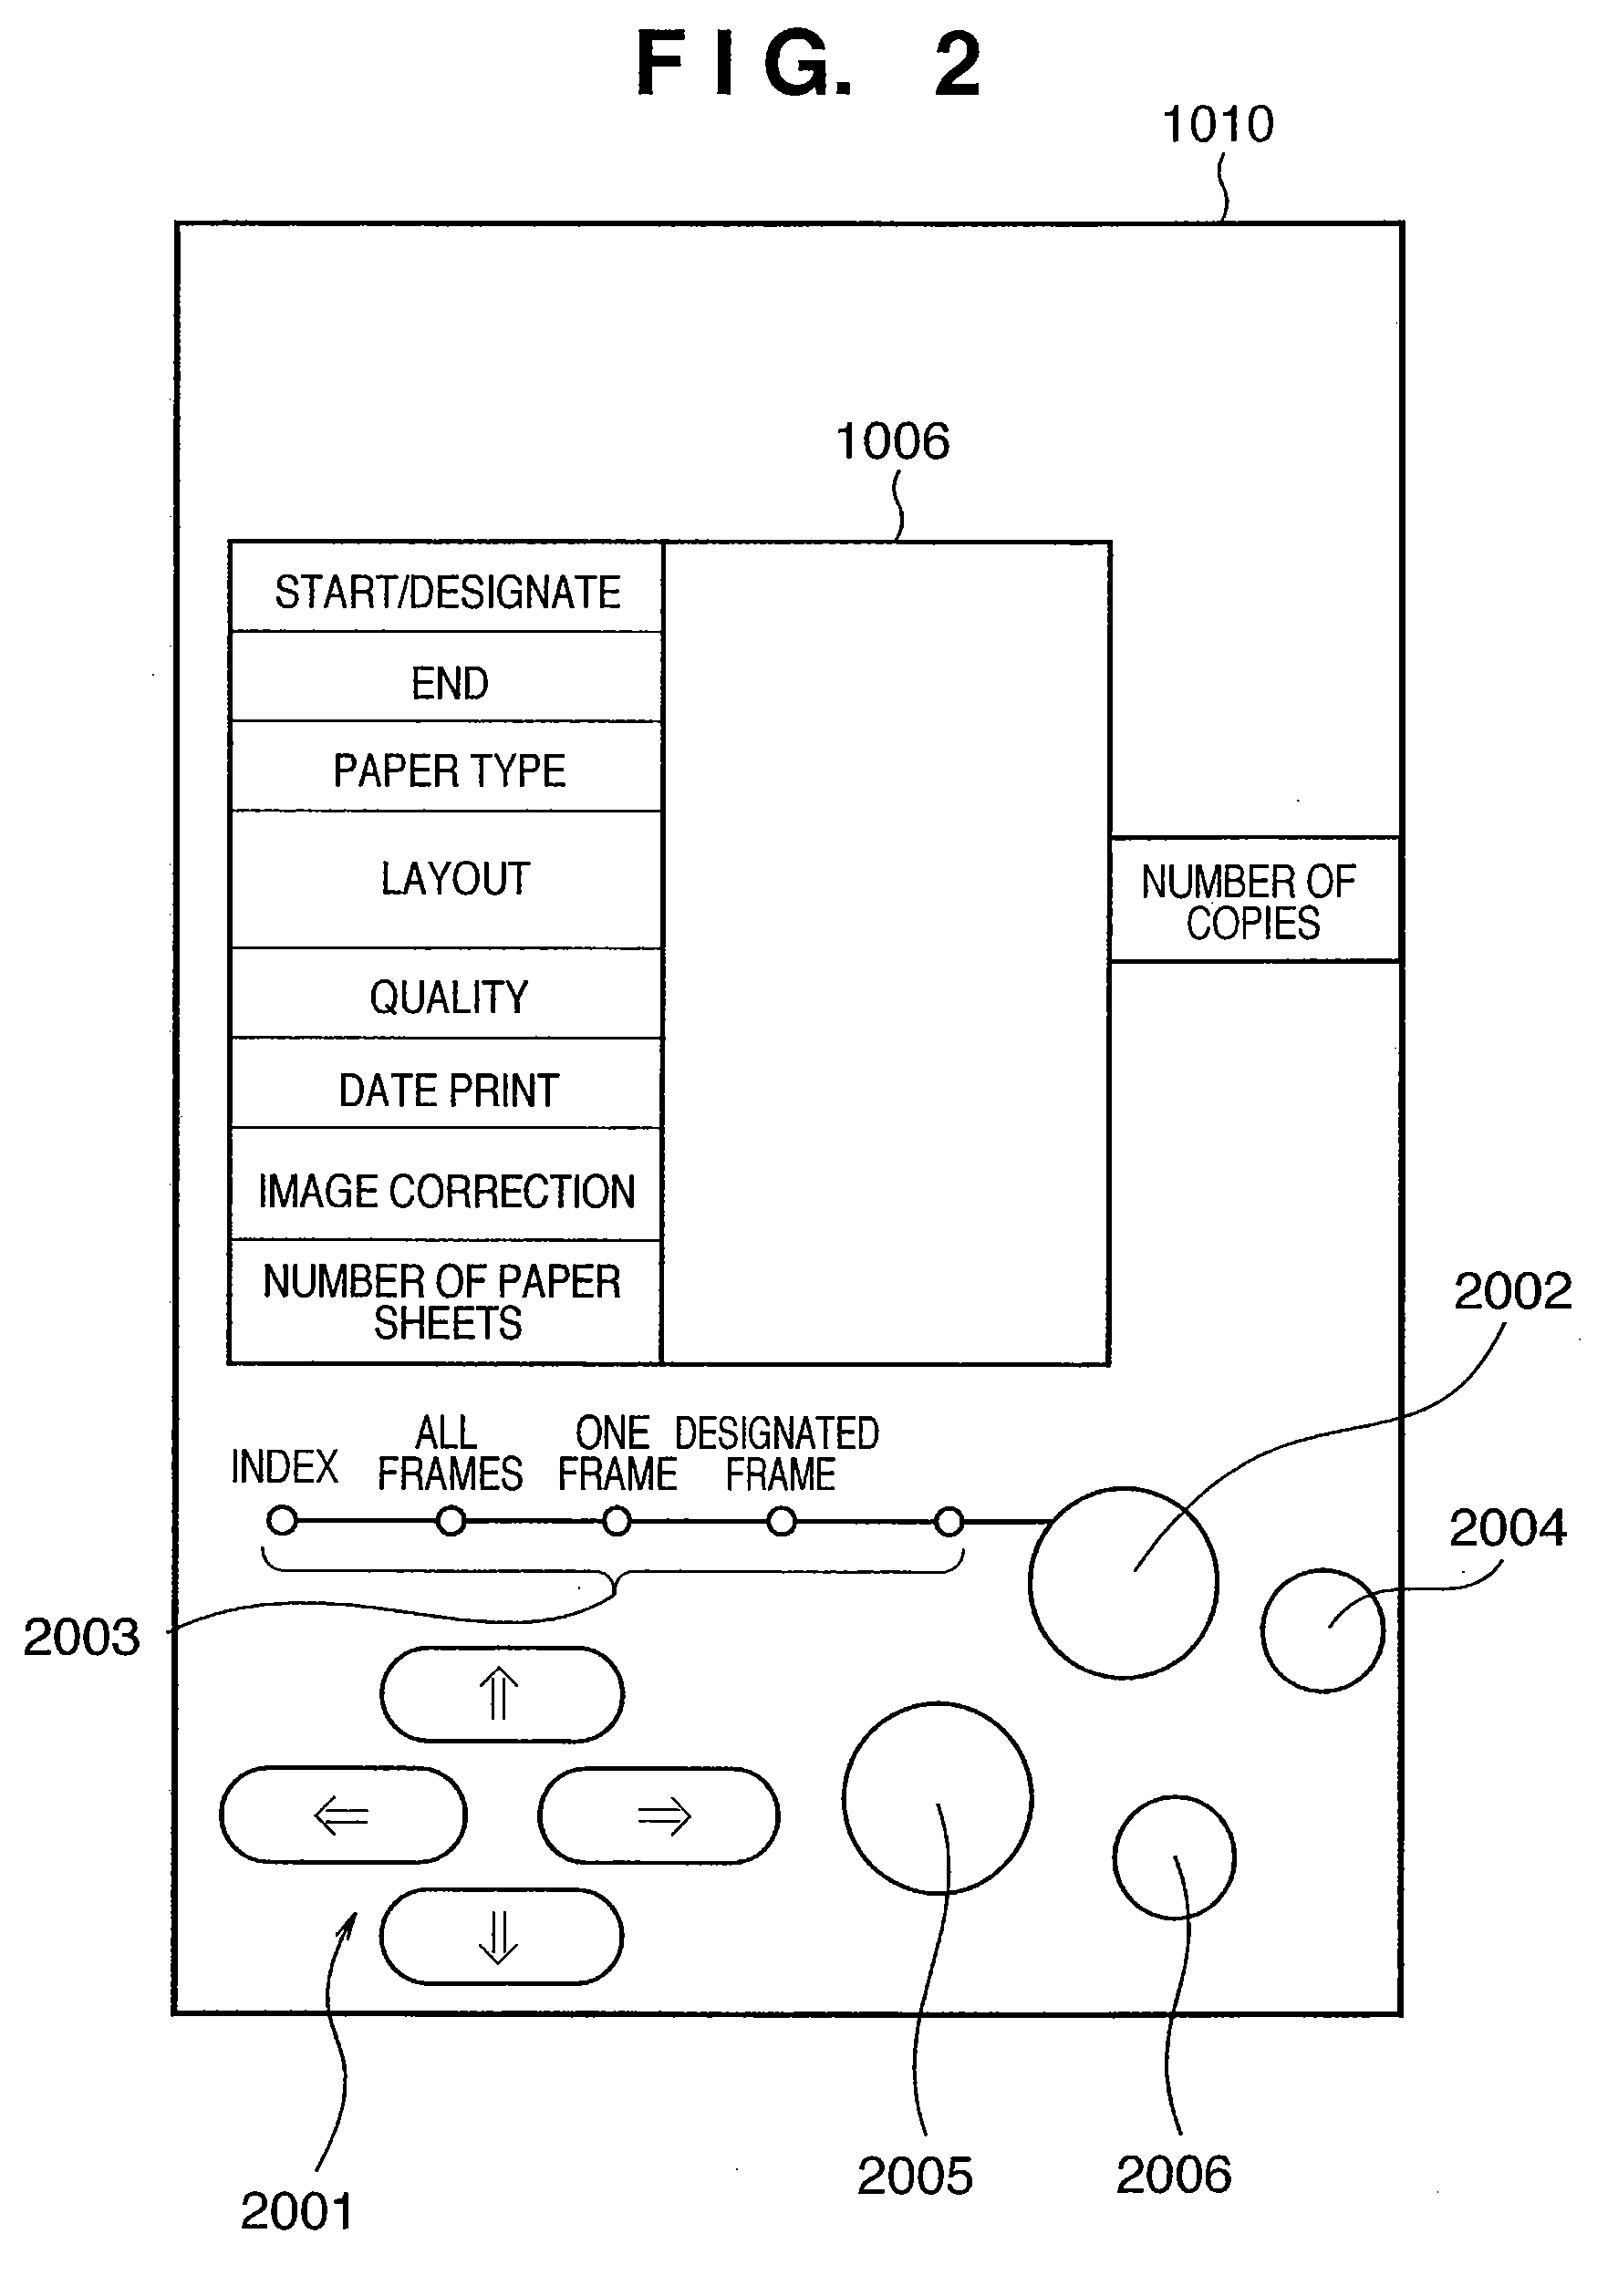 Image supply device, printing apparatus, and printing system